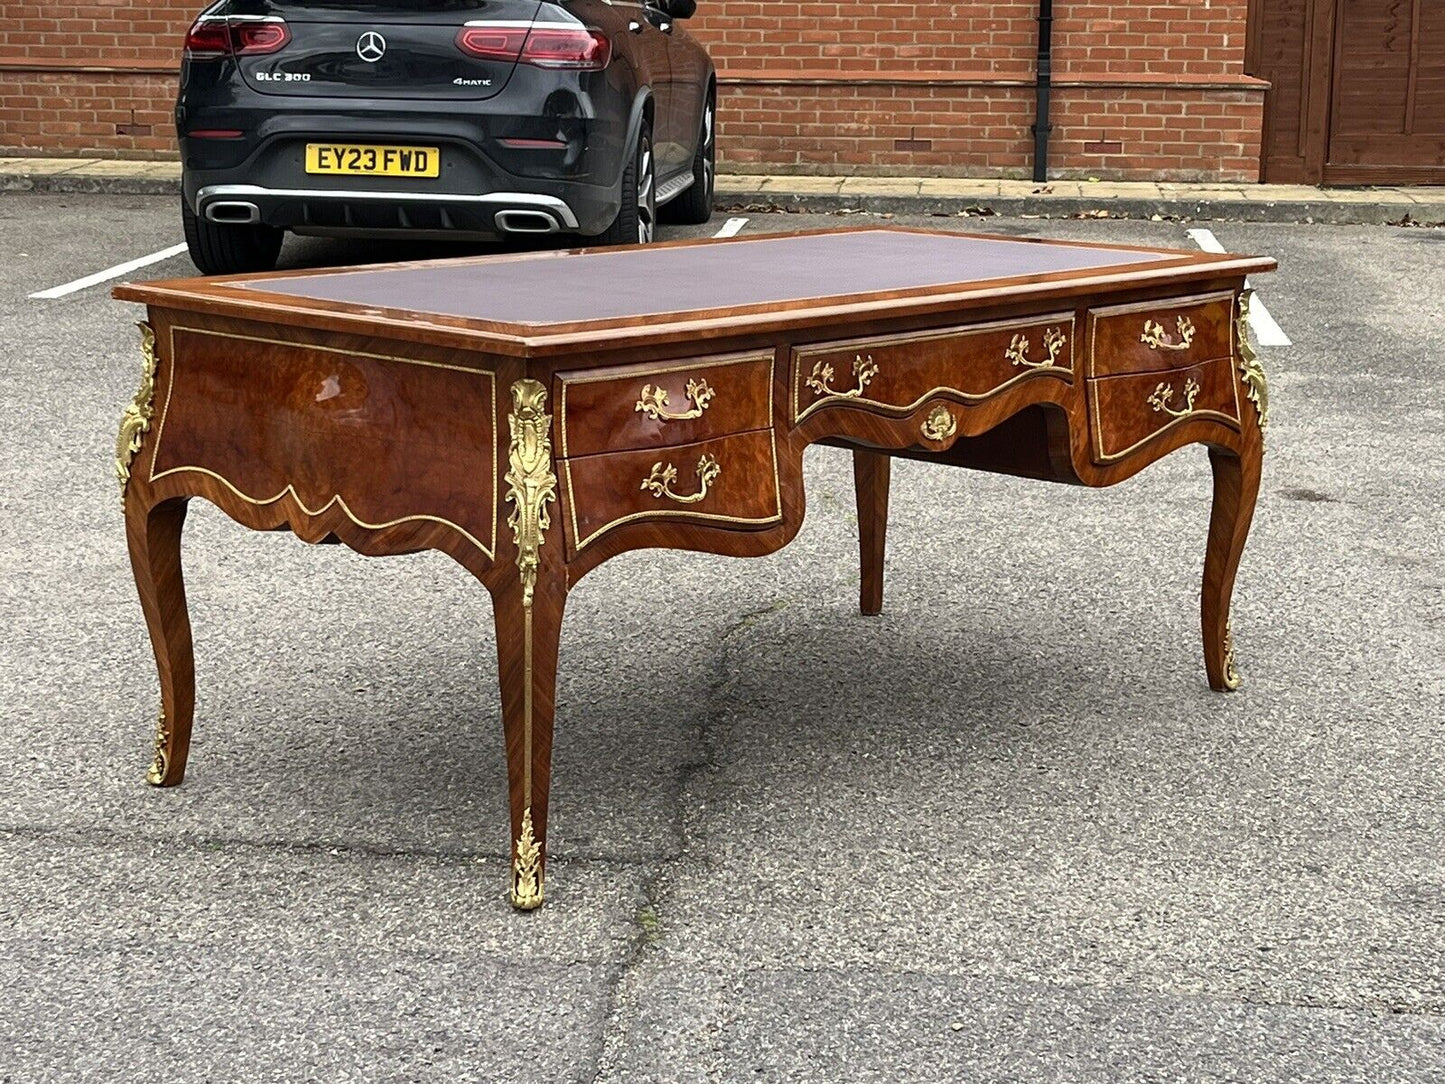 French Style Desk, Inlaid Kingswood With Brass Decoration, Very Impressive.